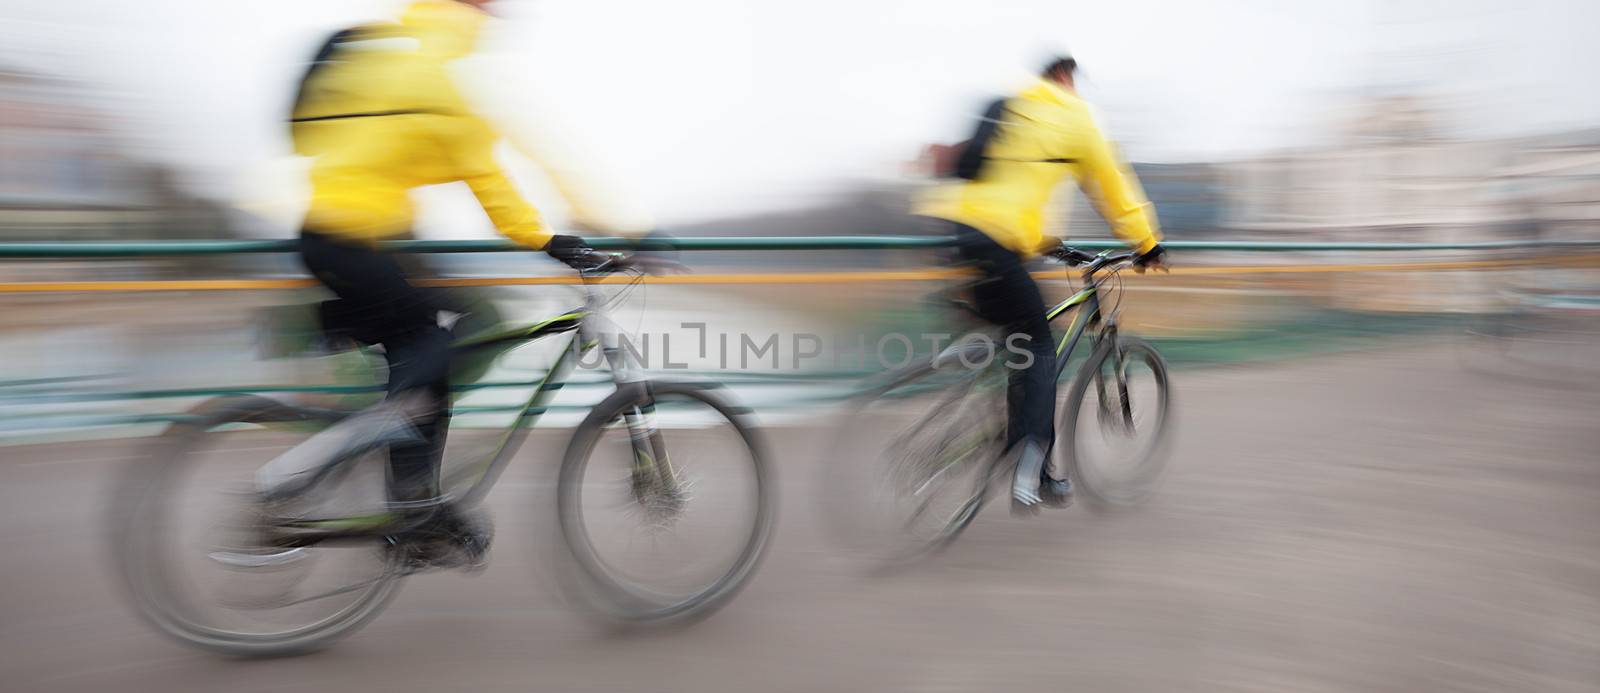 cyclists on the city roadway by palinchak